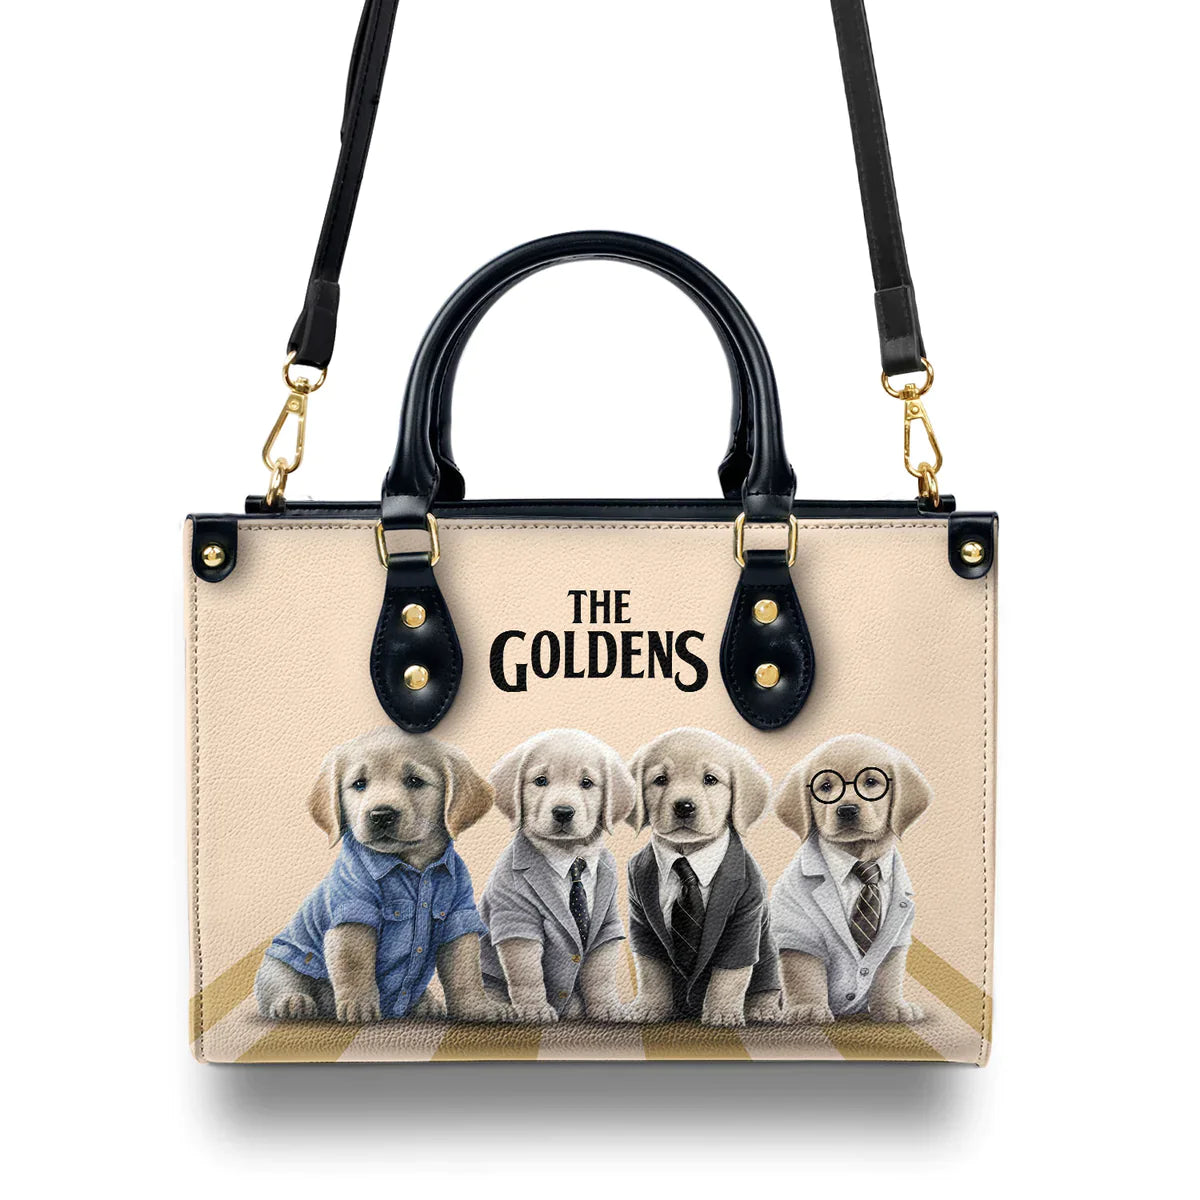 The Goldens Leather Bag